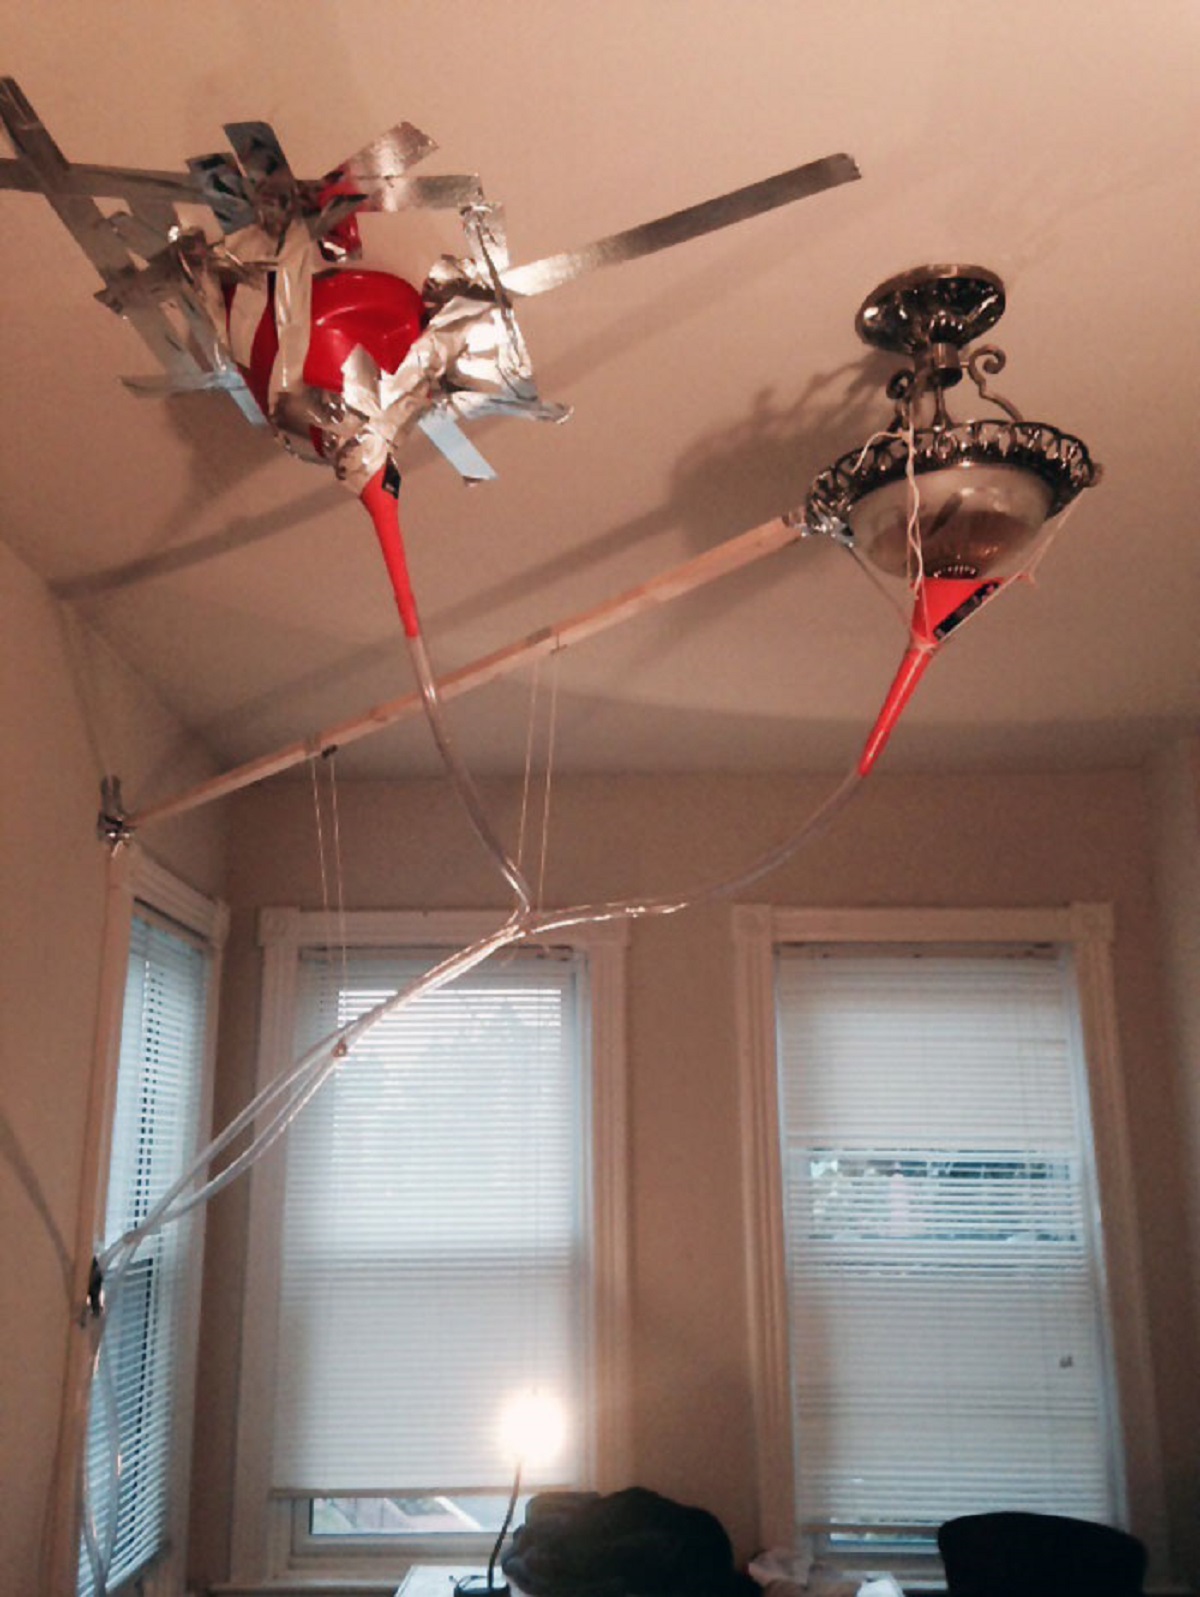 “This is how the landlord fixed the leaky ceiling.”